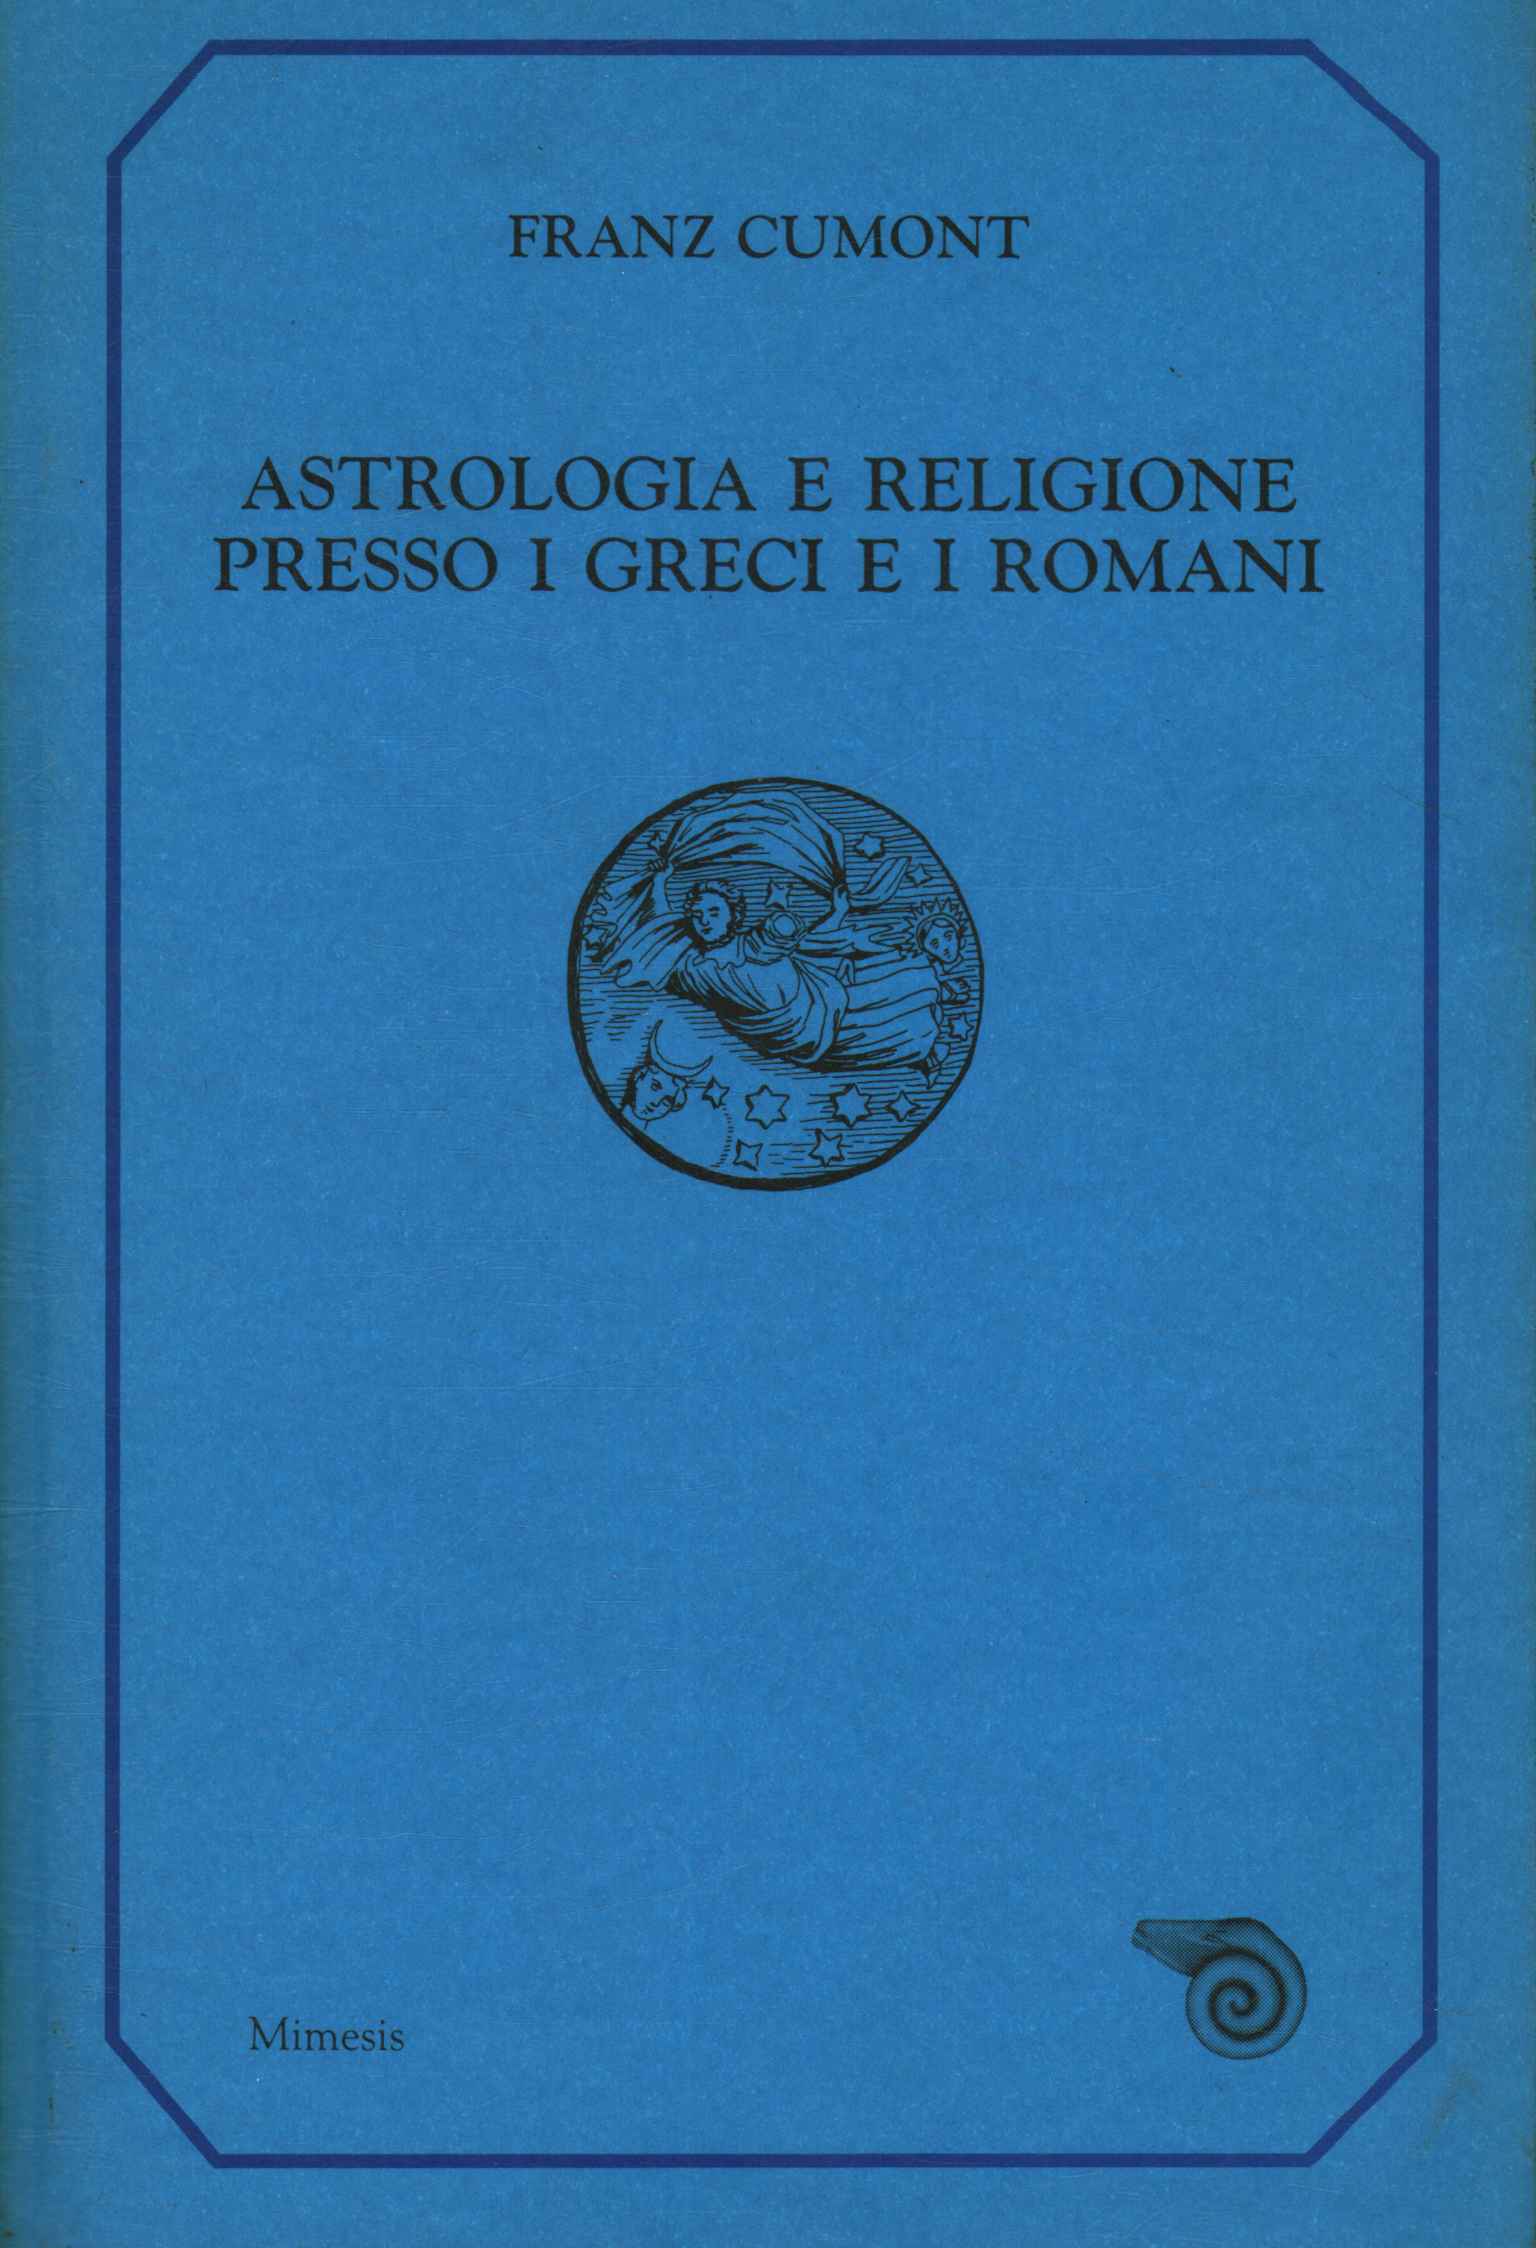 Astrology and religion among the Greeks